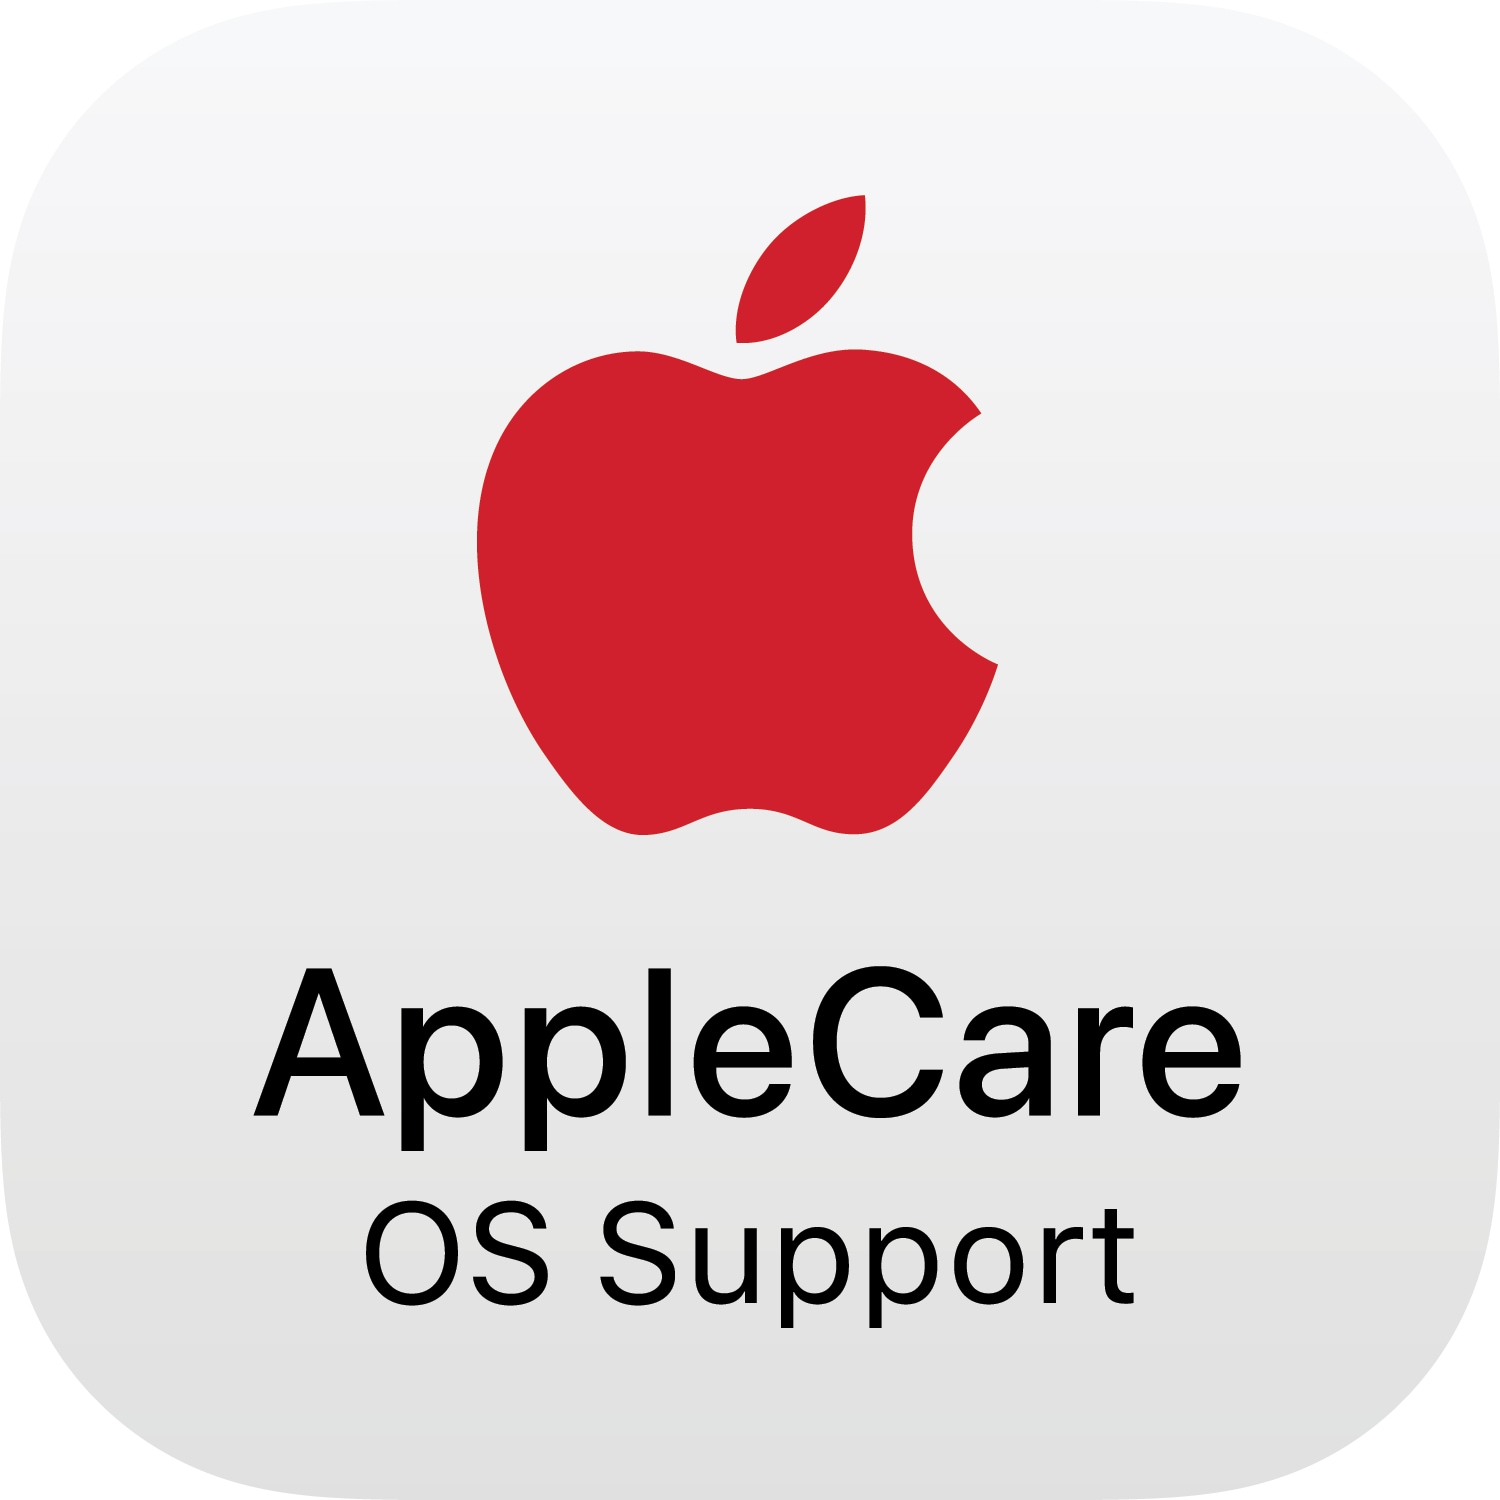 AppleCare OS Support - Alliance - technical support - for Apple Mac OS X Server Software - 2 years